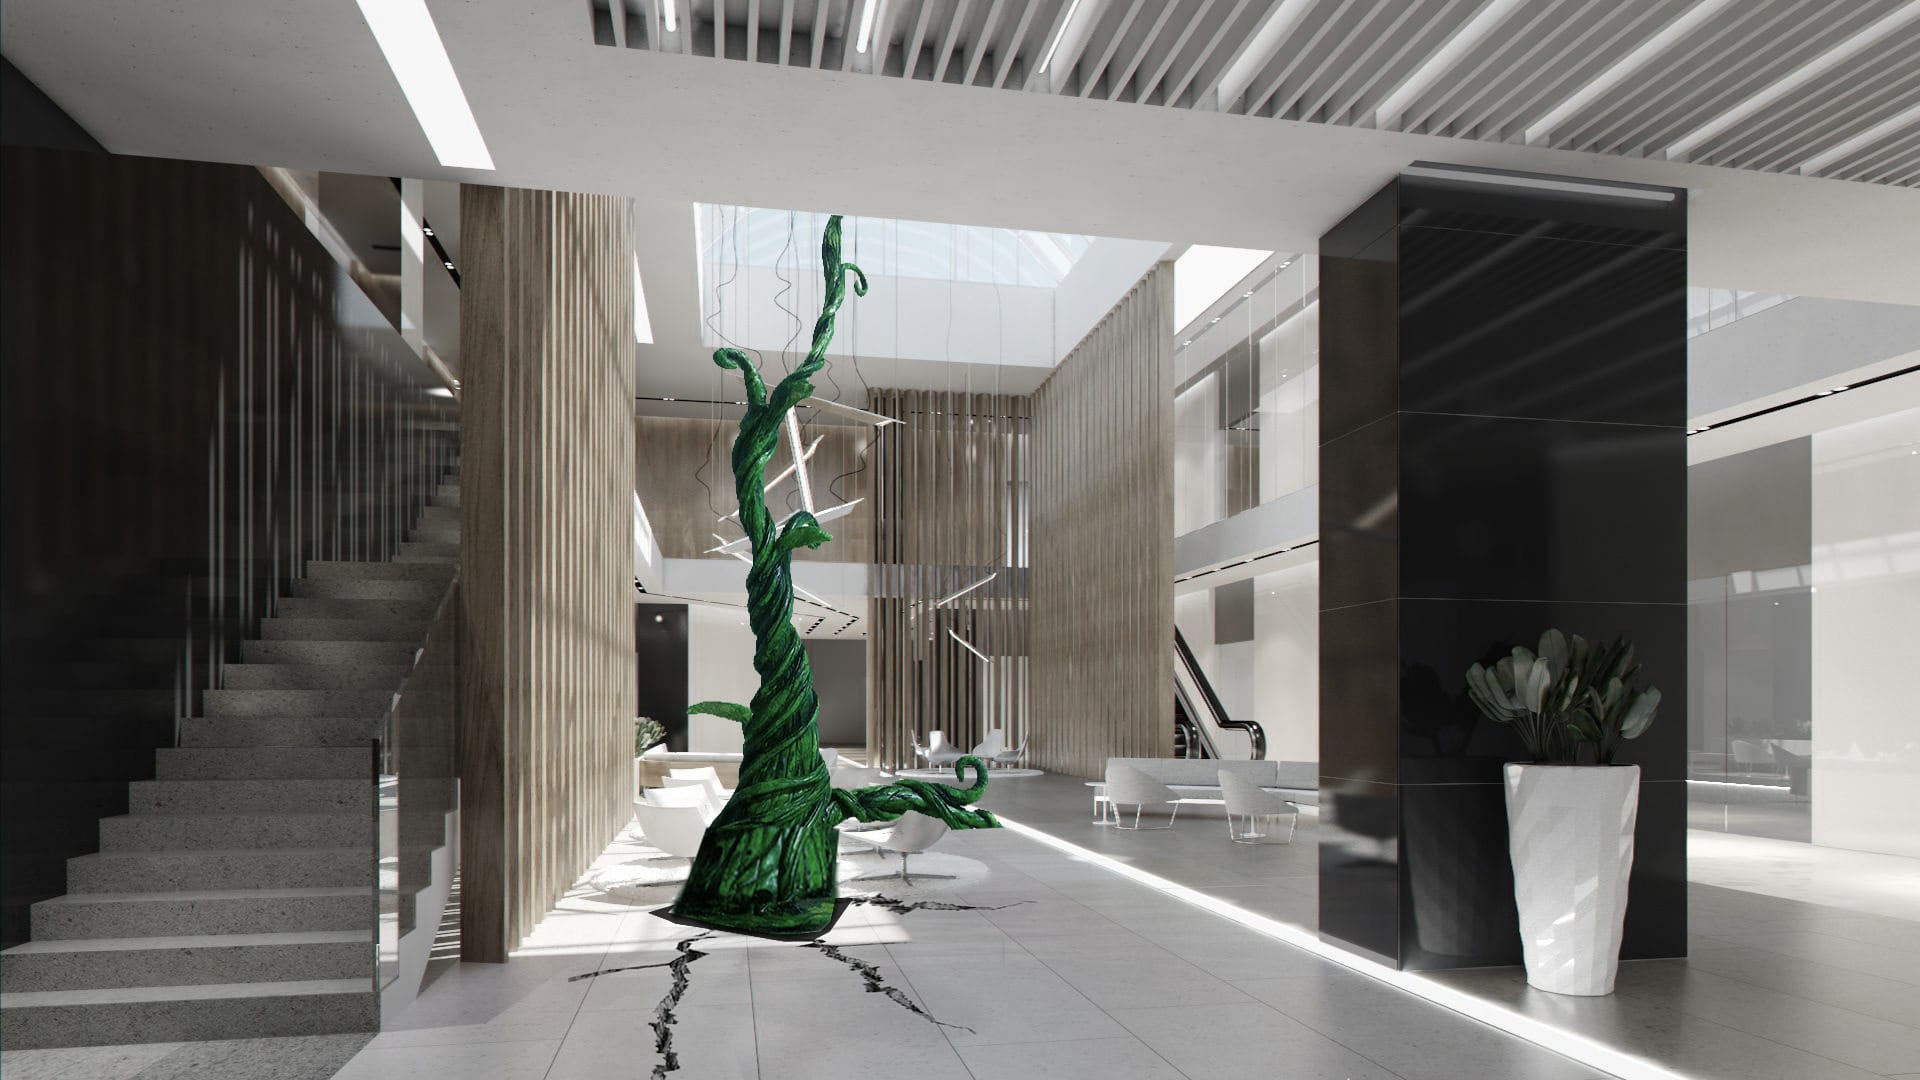 An image of a beanstalk growing through the floor of a corporate looking office